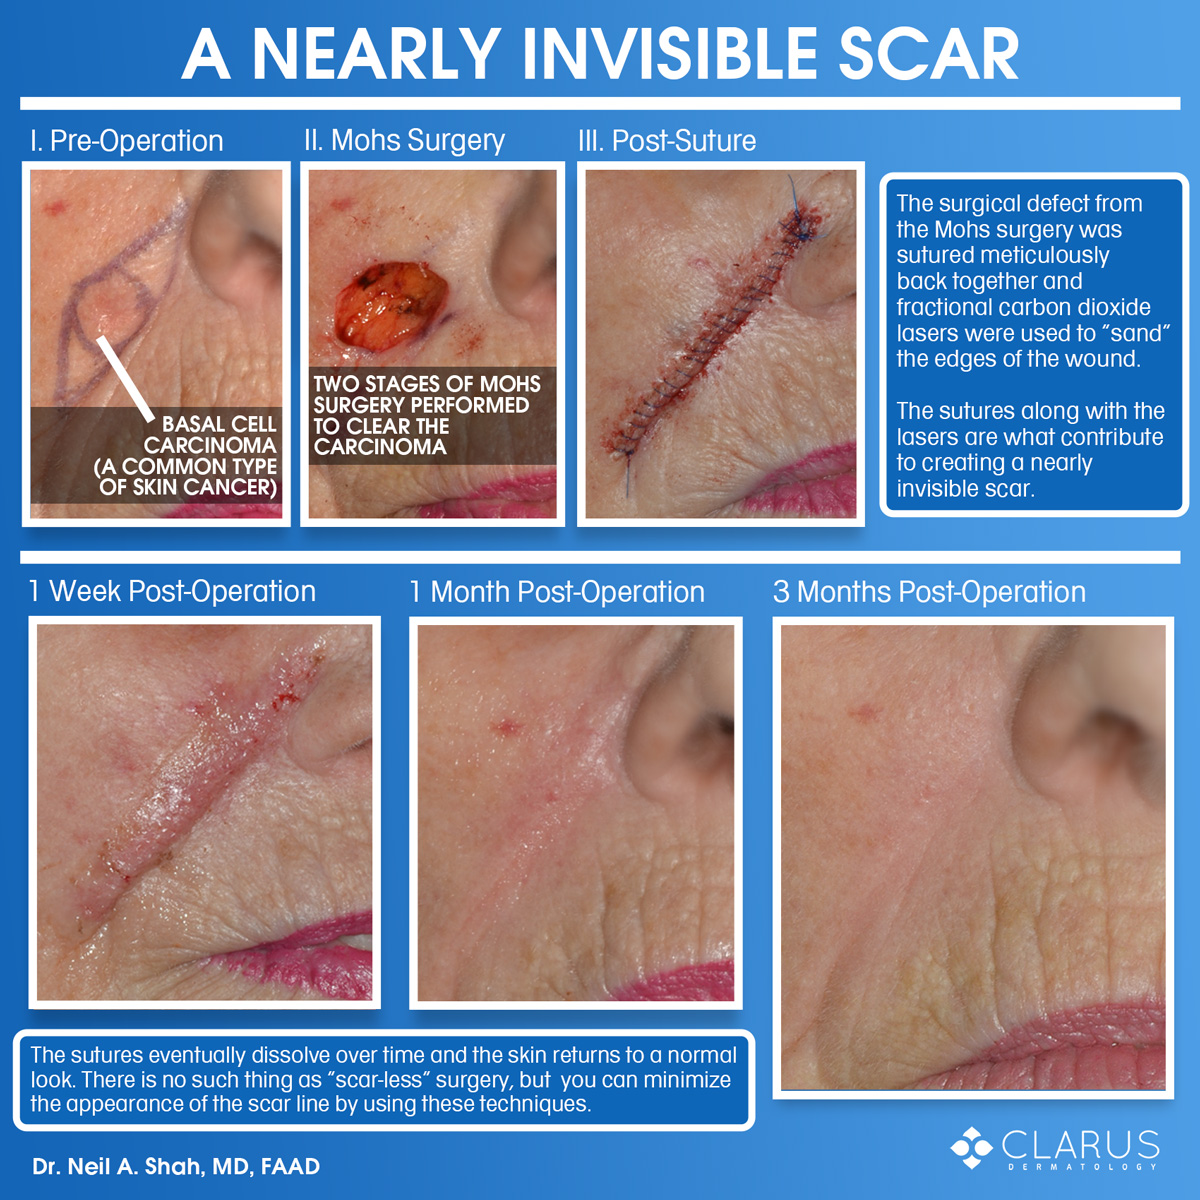 One of the reasons that Clarus Dermatology gets so many referrals from other dermatologists is because of the quality of our scar outcomes. In the case of this patient, the scar is nearly invisible only three months post-operation.